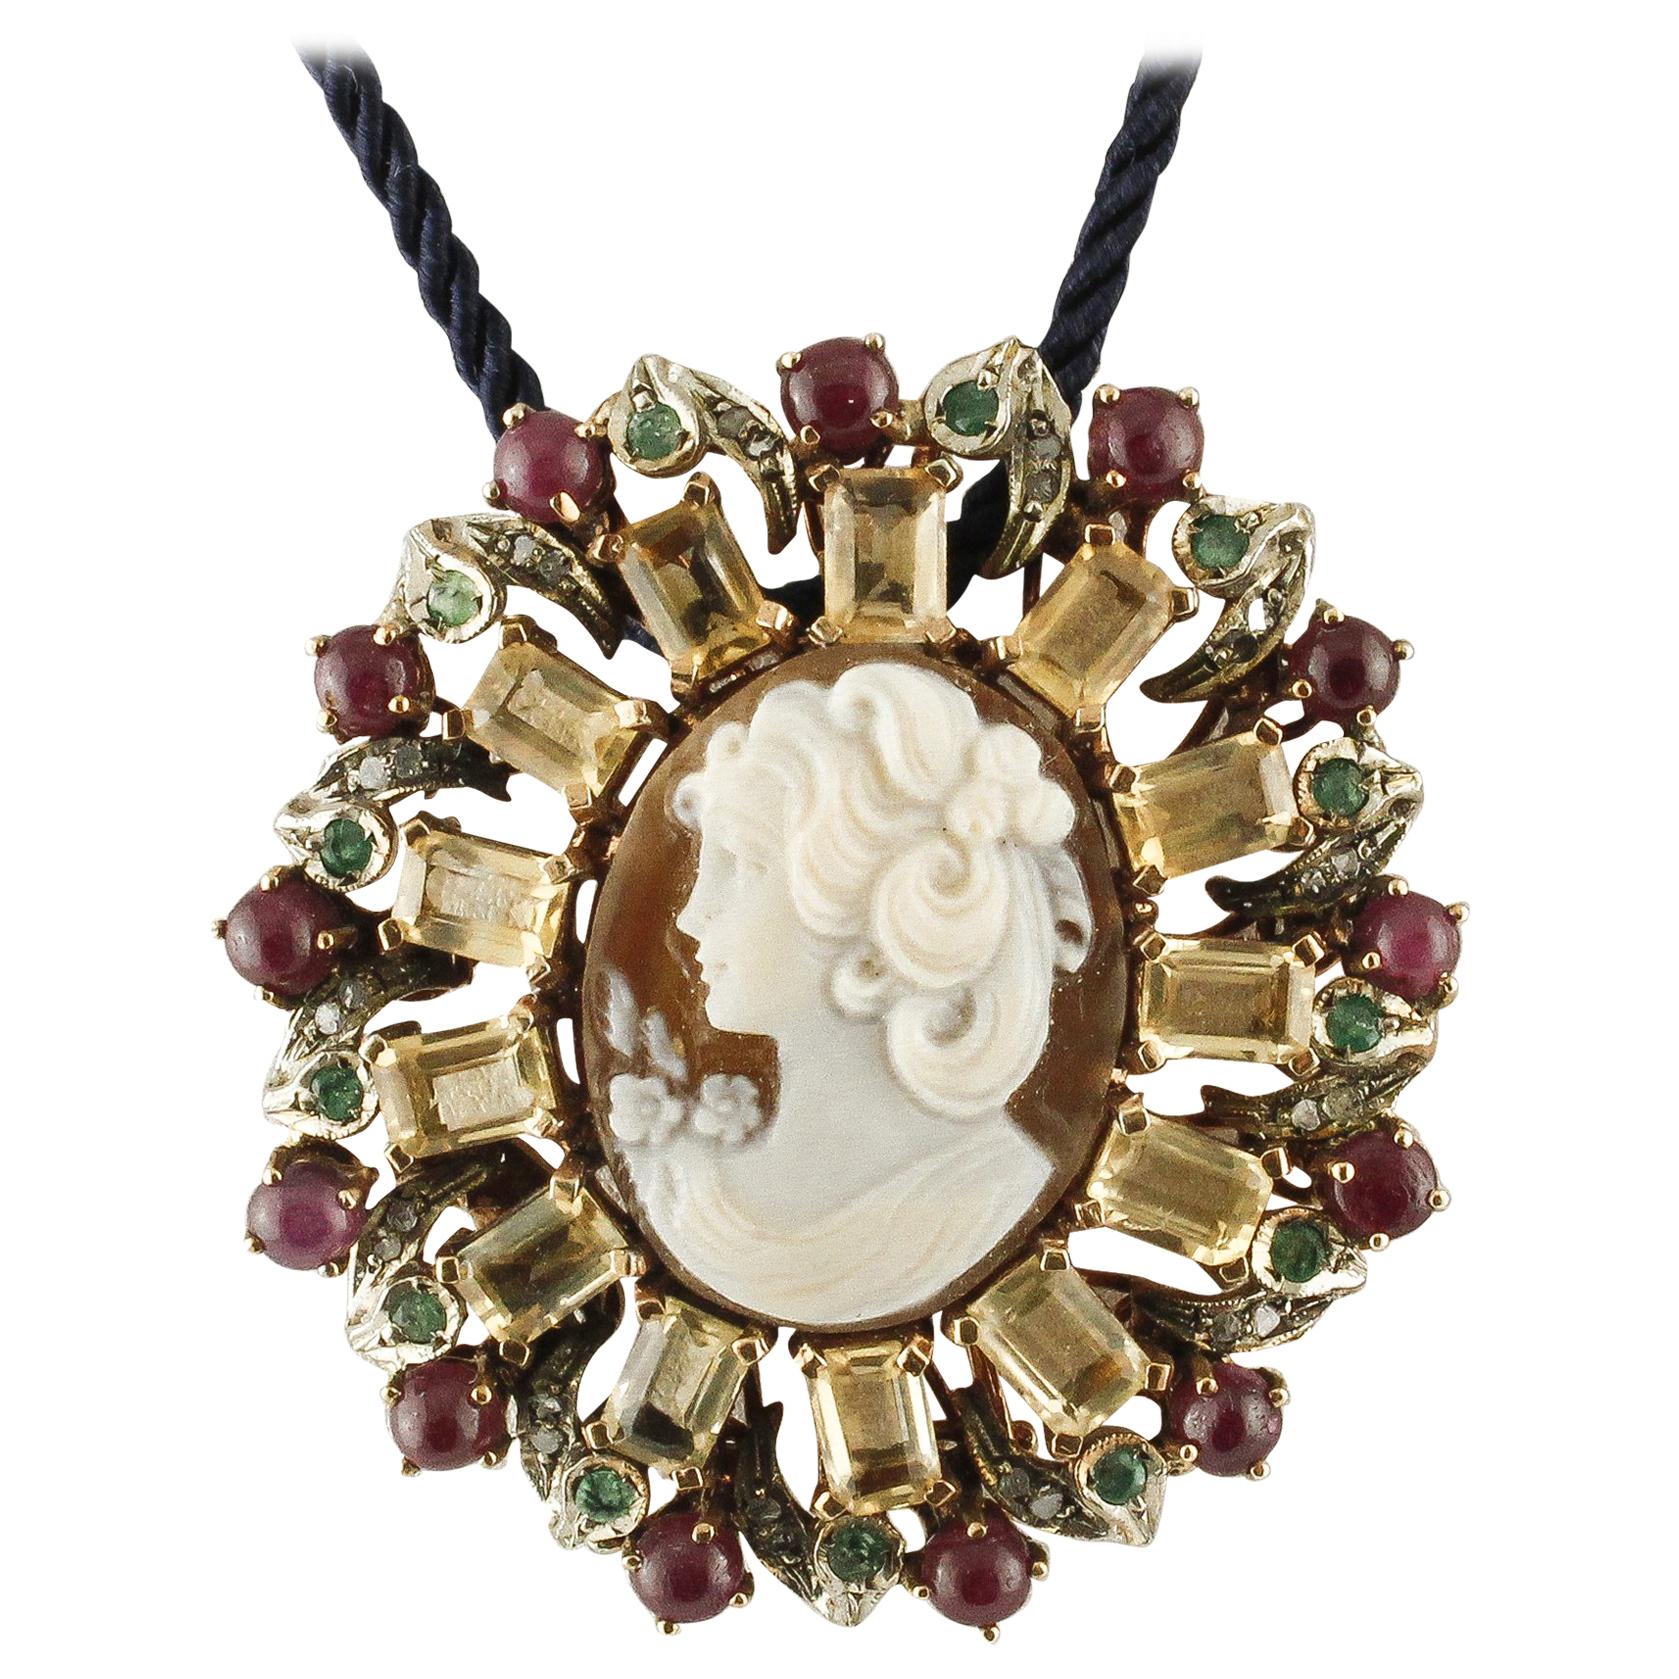 Diamonds Rubies Emeralds Yellow Topaz Cameo Gold Silver Brooch/Pendant Necklace